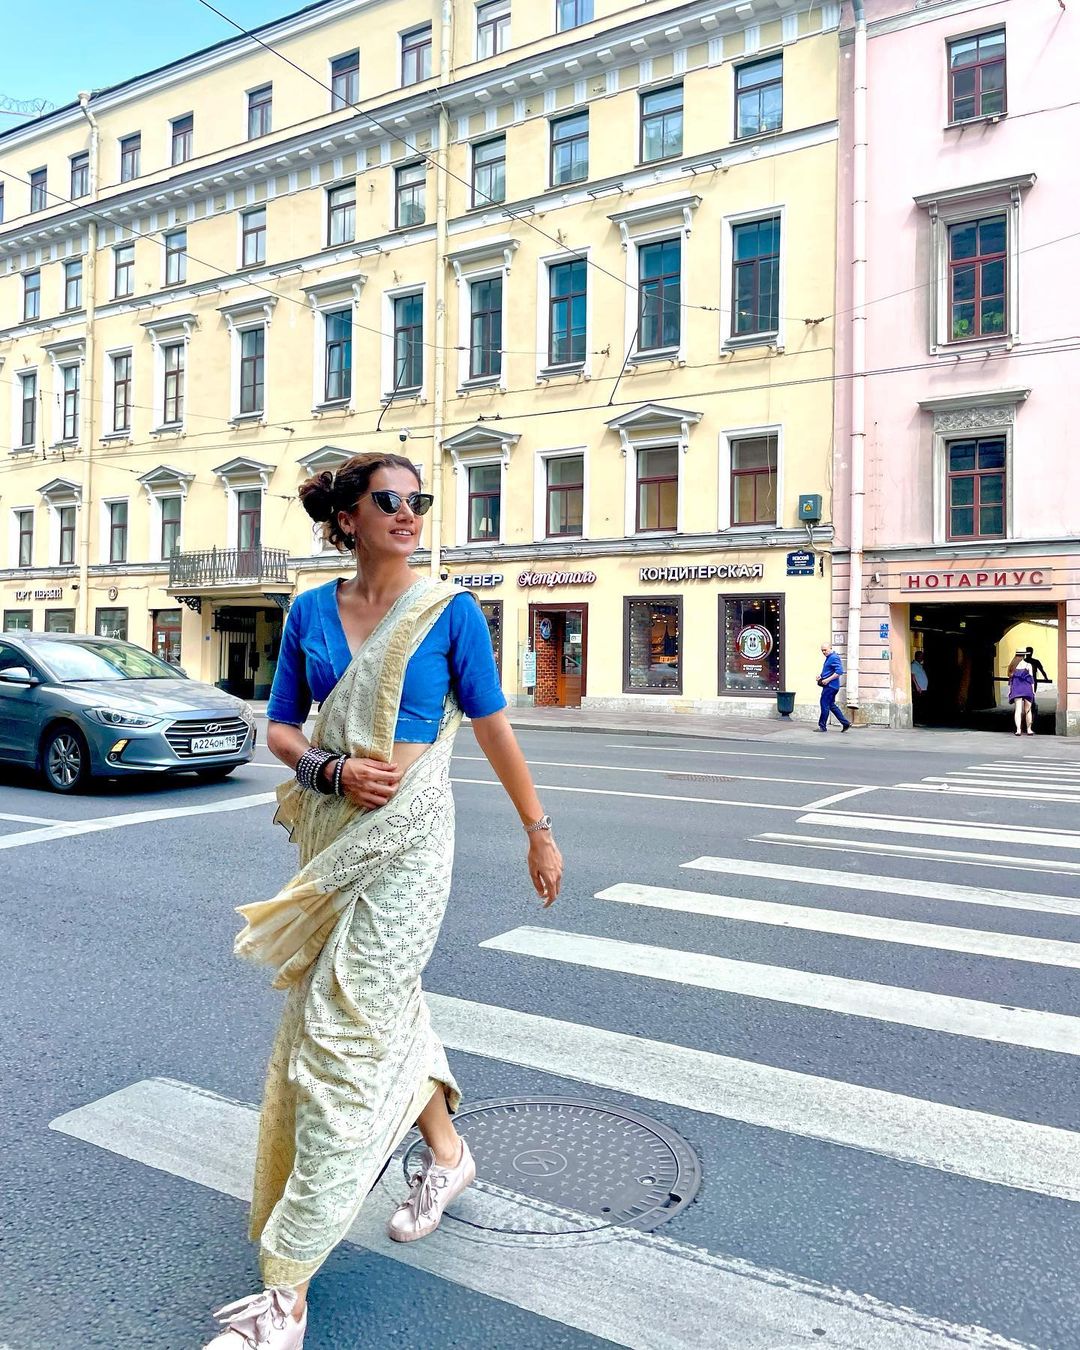 Taapsee Pannu being touristy in a cotton saree